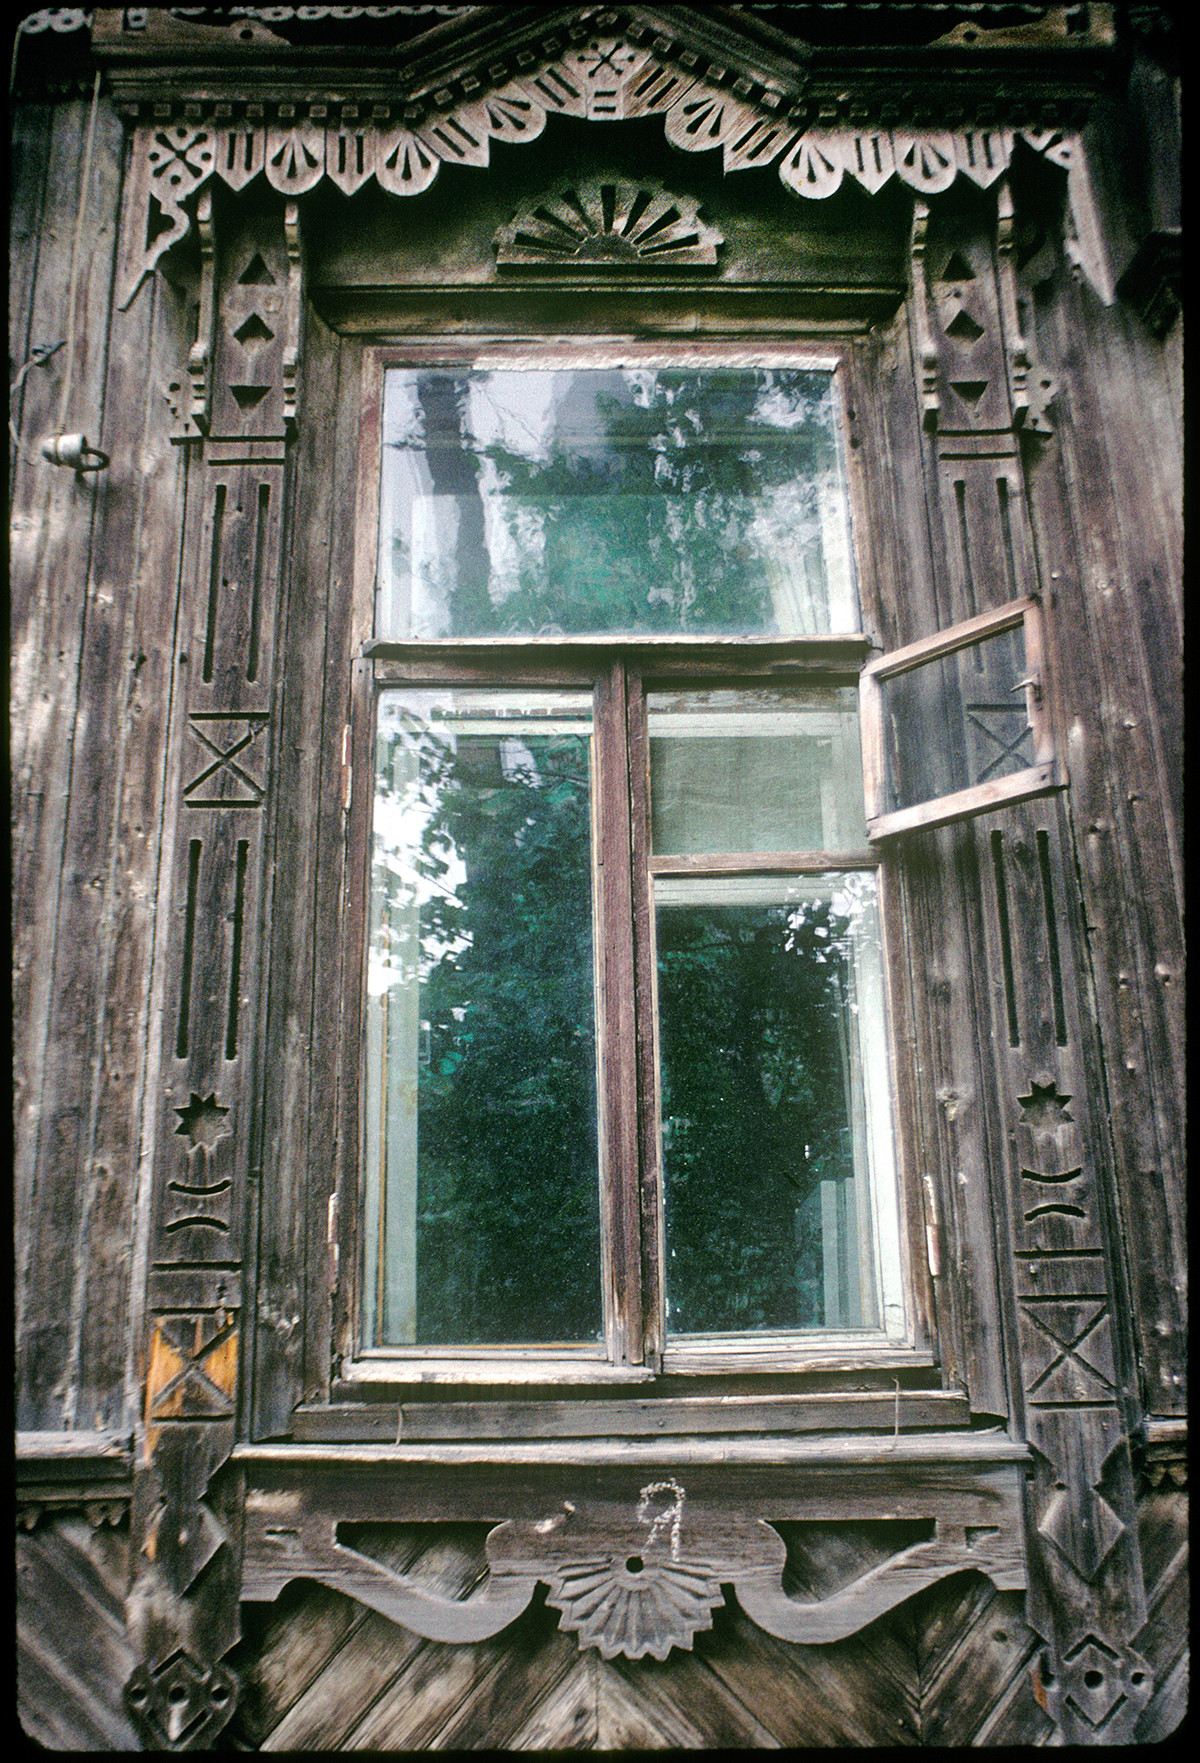 Wooden house, Monastery Street 26. Window with decorative surround. August 23, 1999 